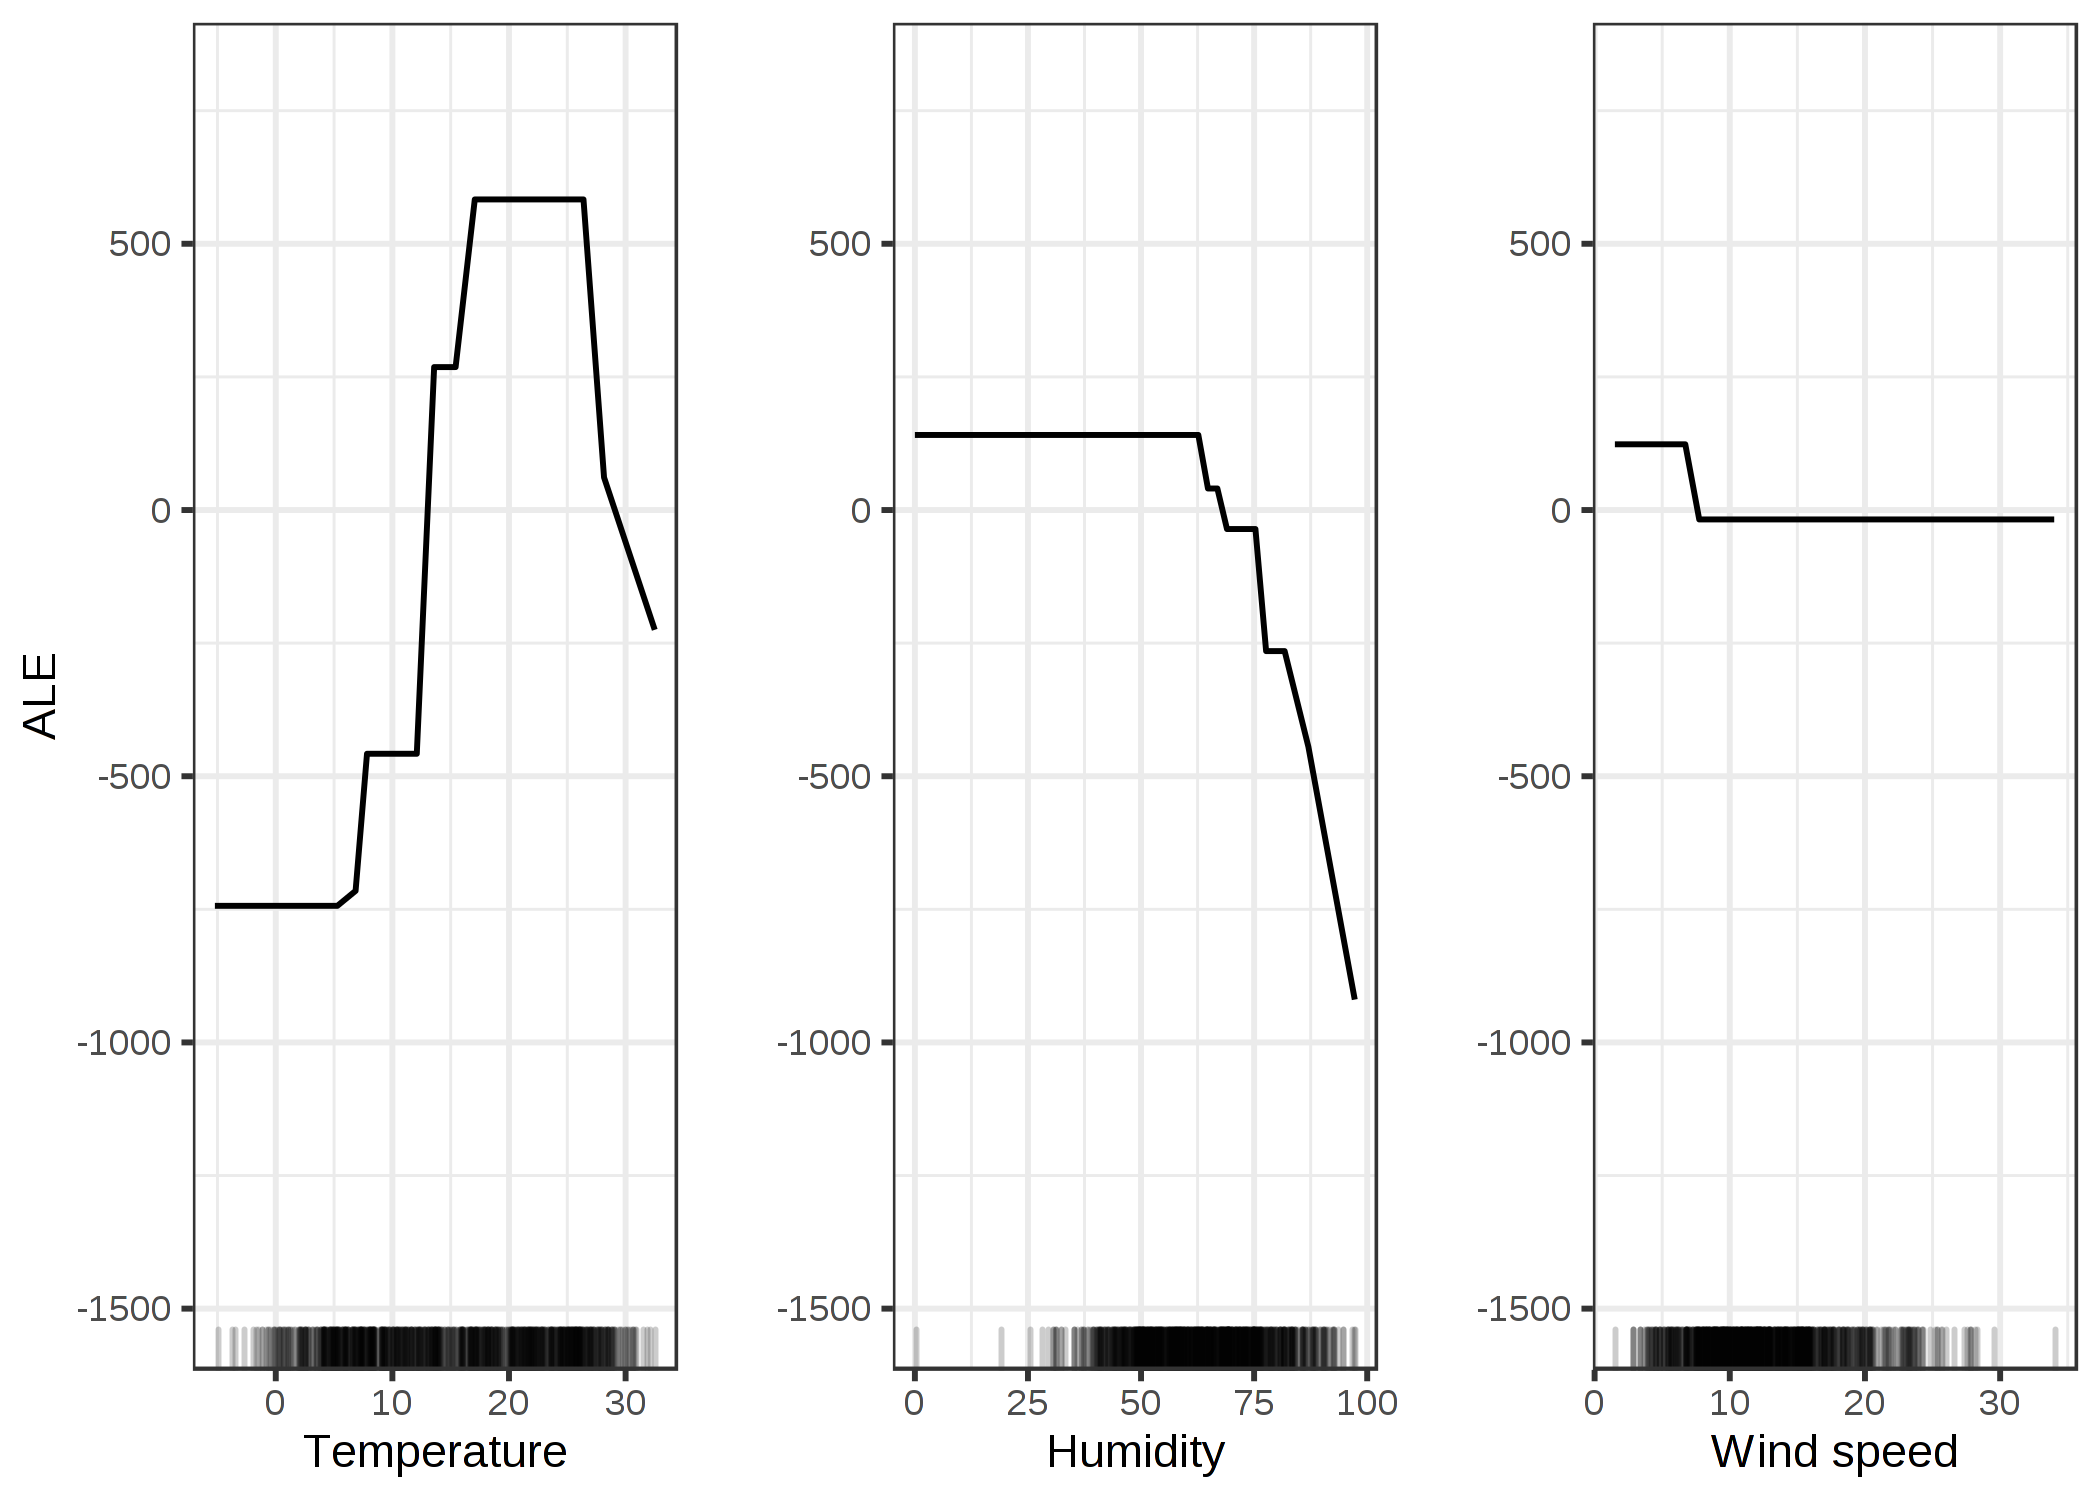 ALE plots for the bike prediction model by temperature, humidity and wind speed. The temperature has a strong effect on the prediction. The average prediction rises with increasing temperature, but falls again above 25 degrees Celsius. Humidity has a negative effect: When above 60%, the higher the relative humidity, the lower the prediction. The wind speed does not affect the predictions much.